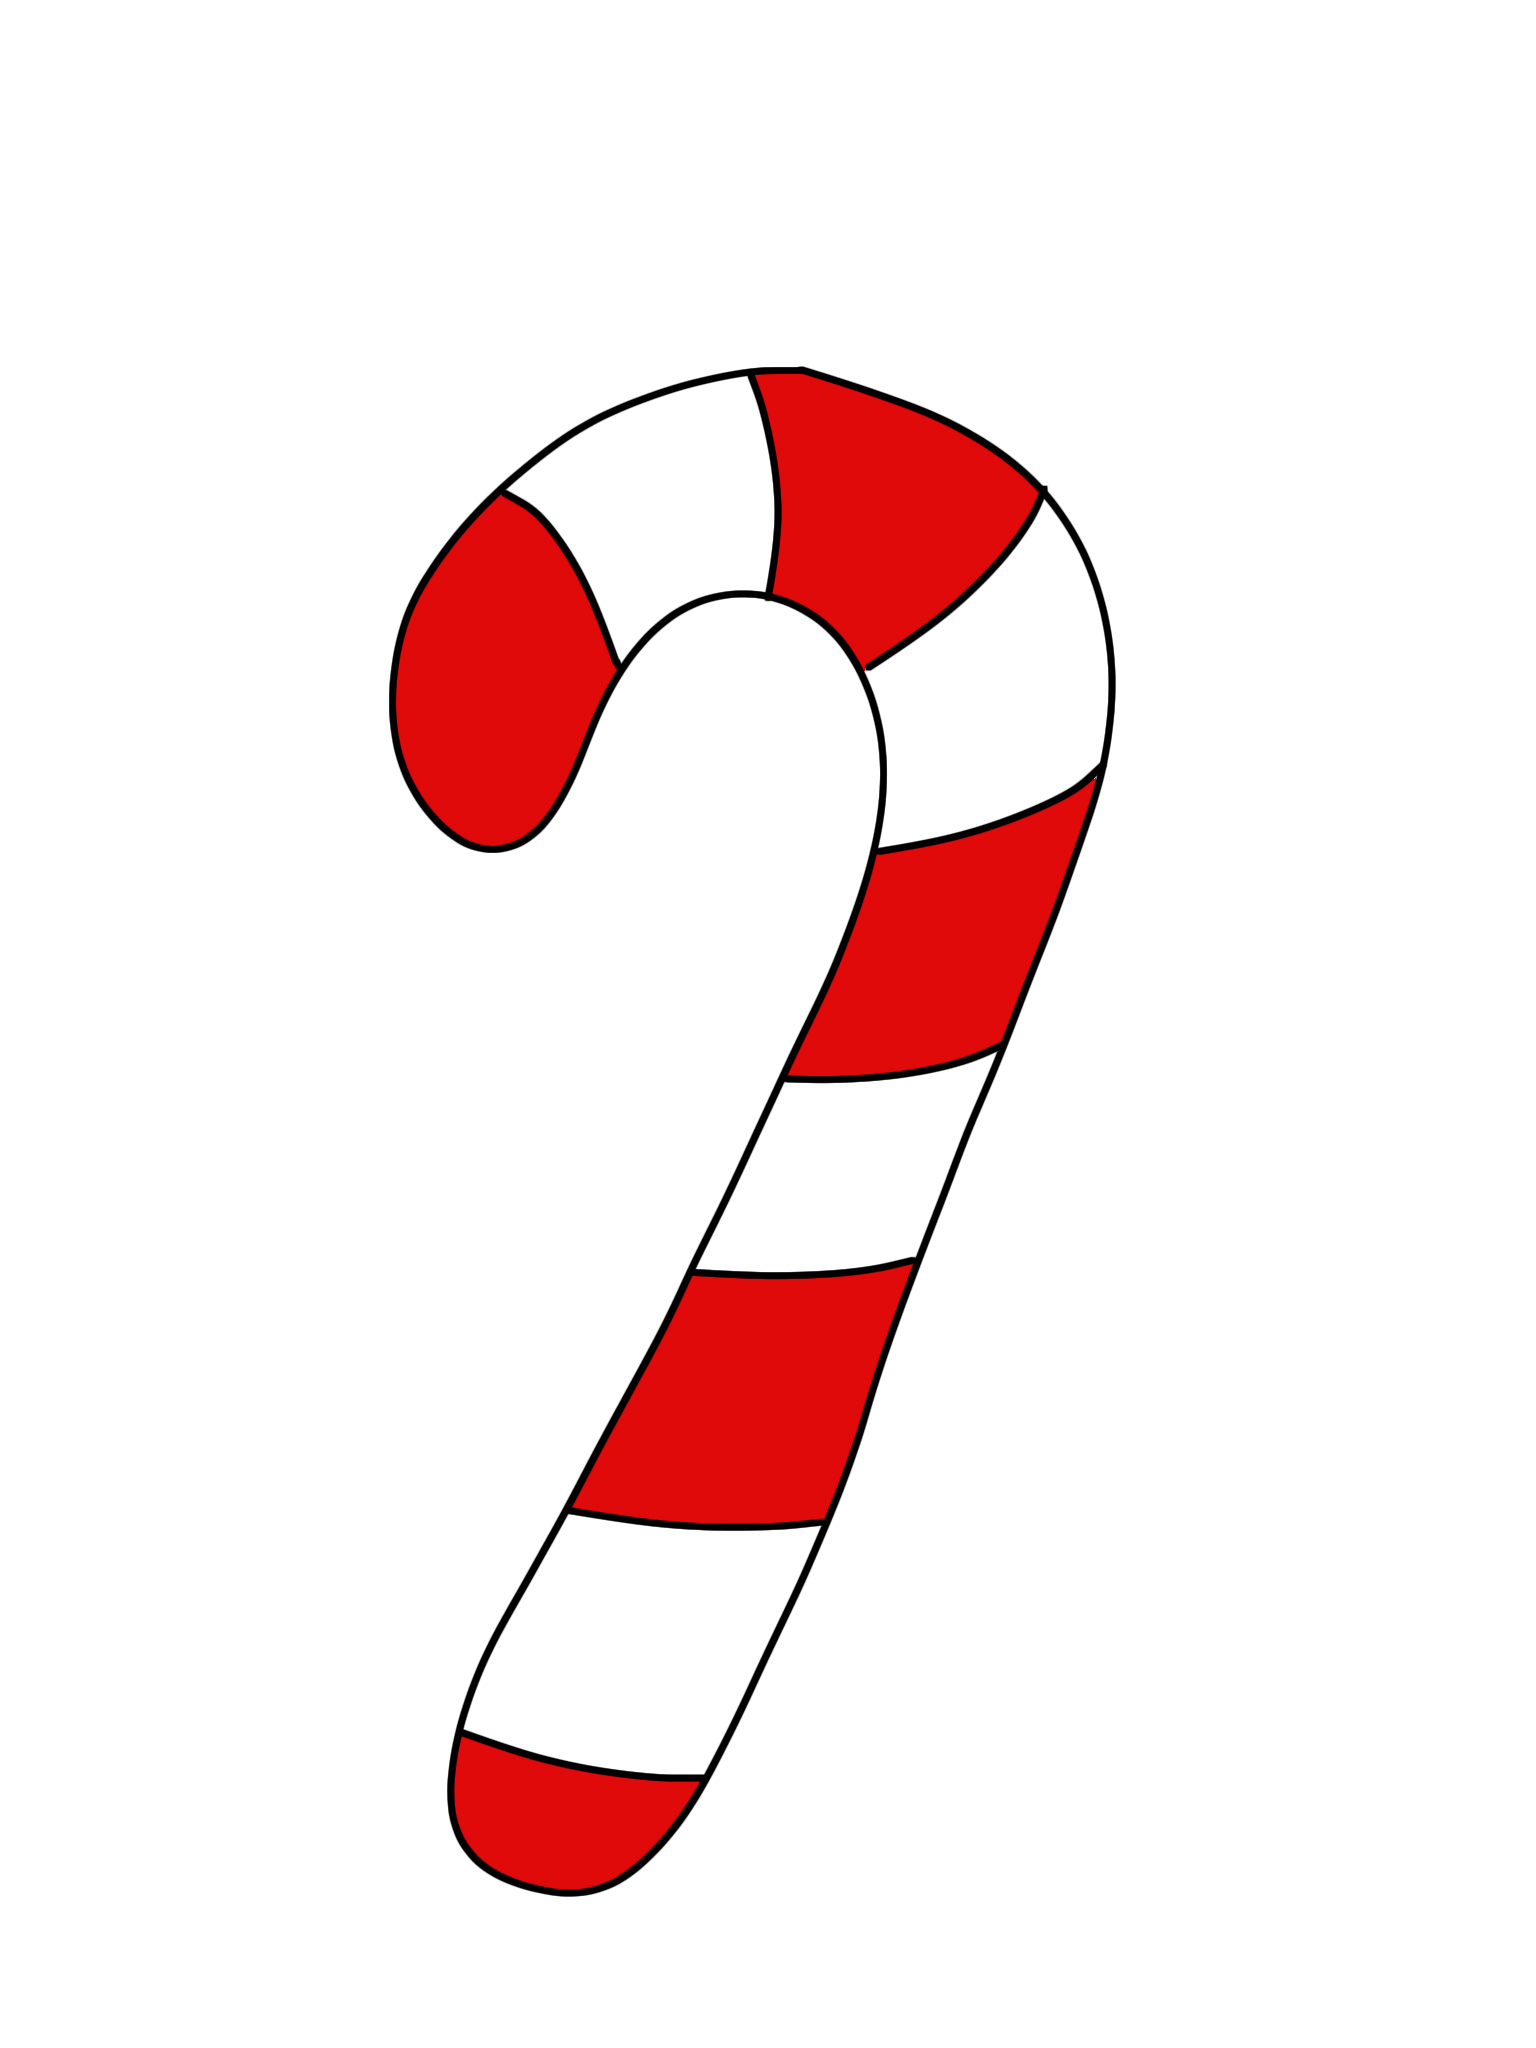 Candy Cane Clip Art & Candy Cane Clip Art Clip Art Images.